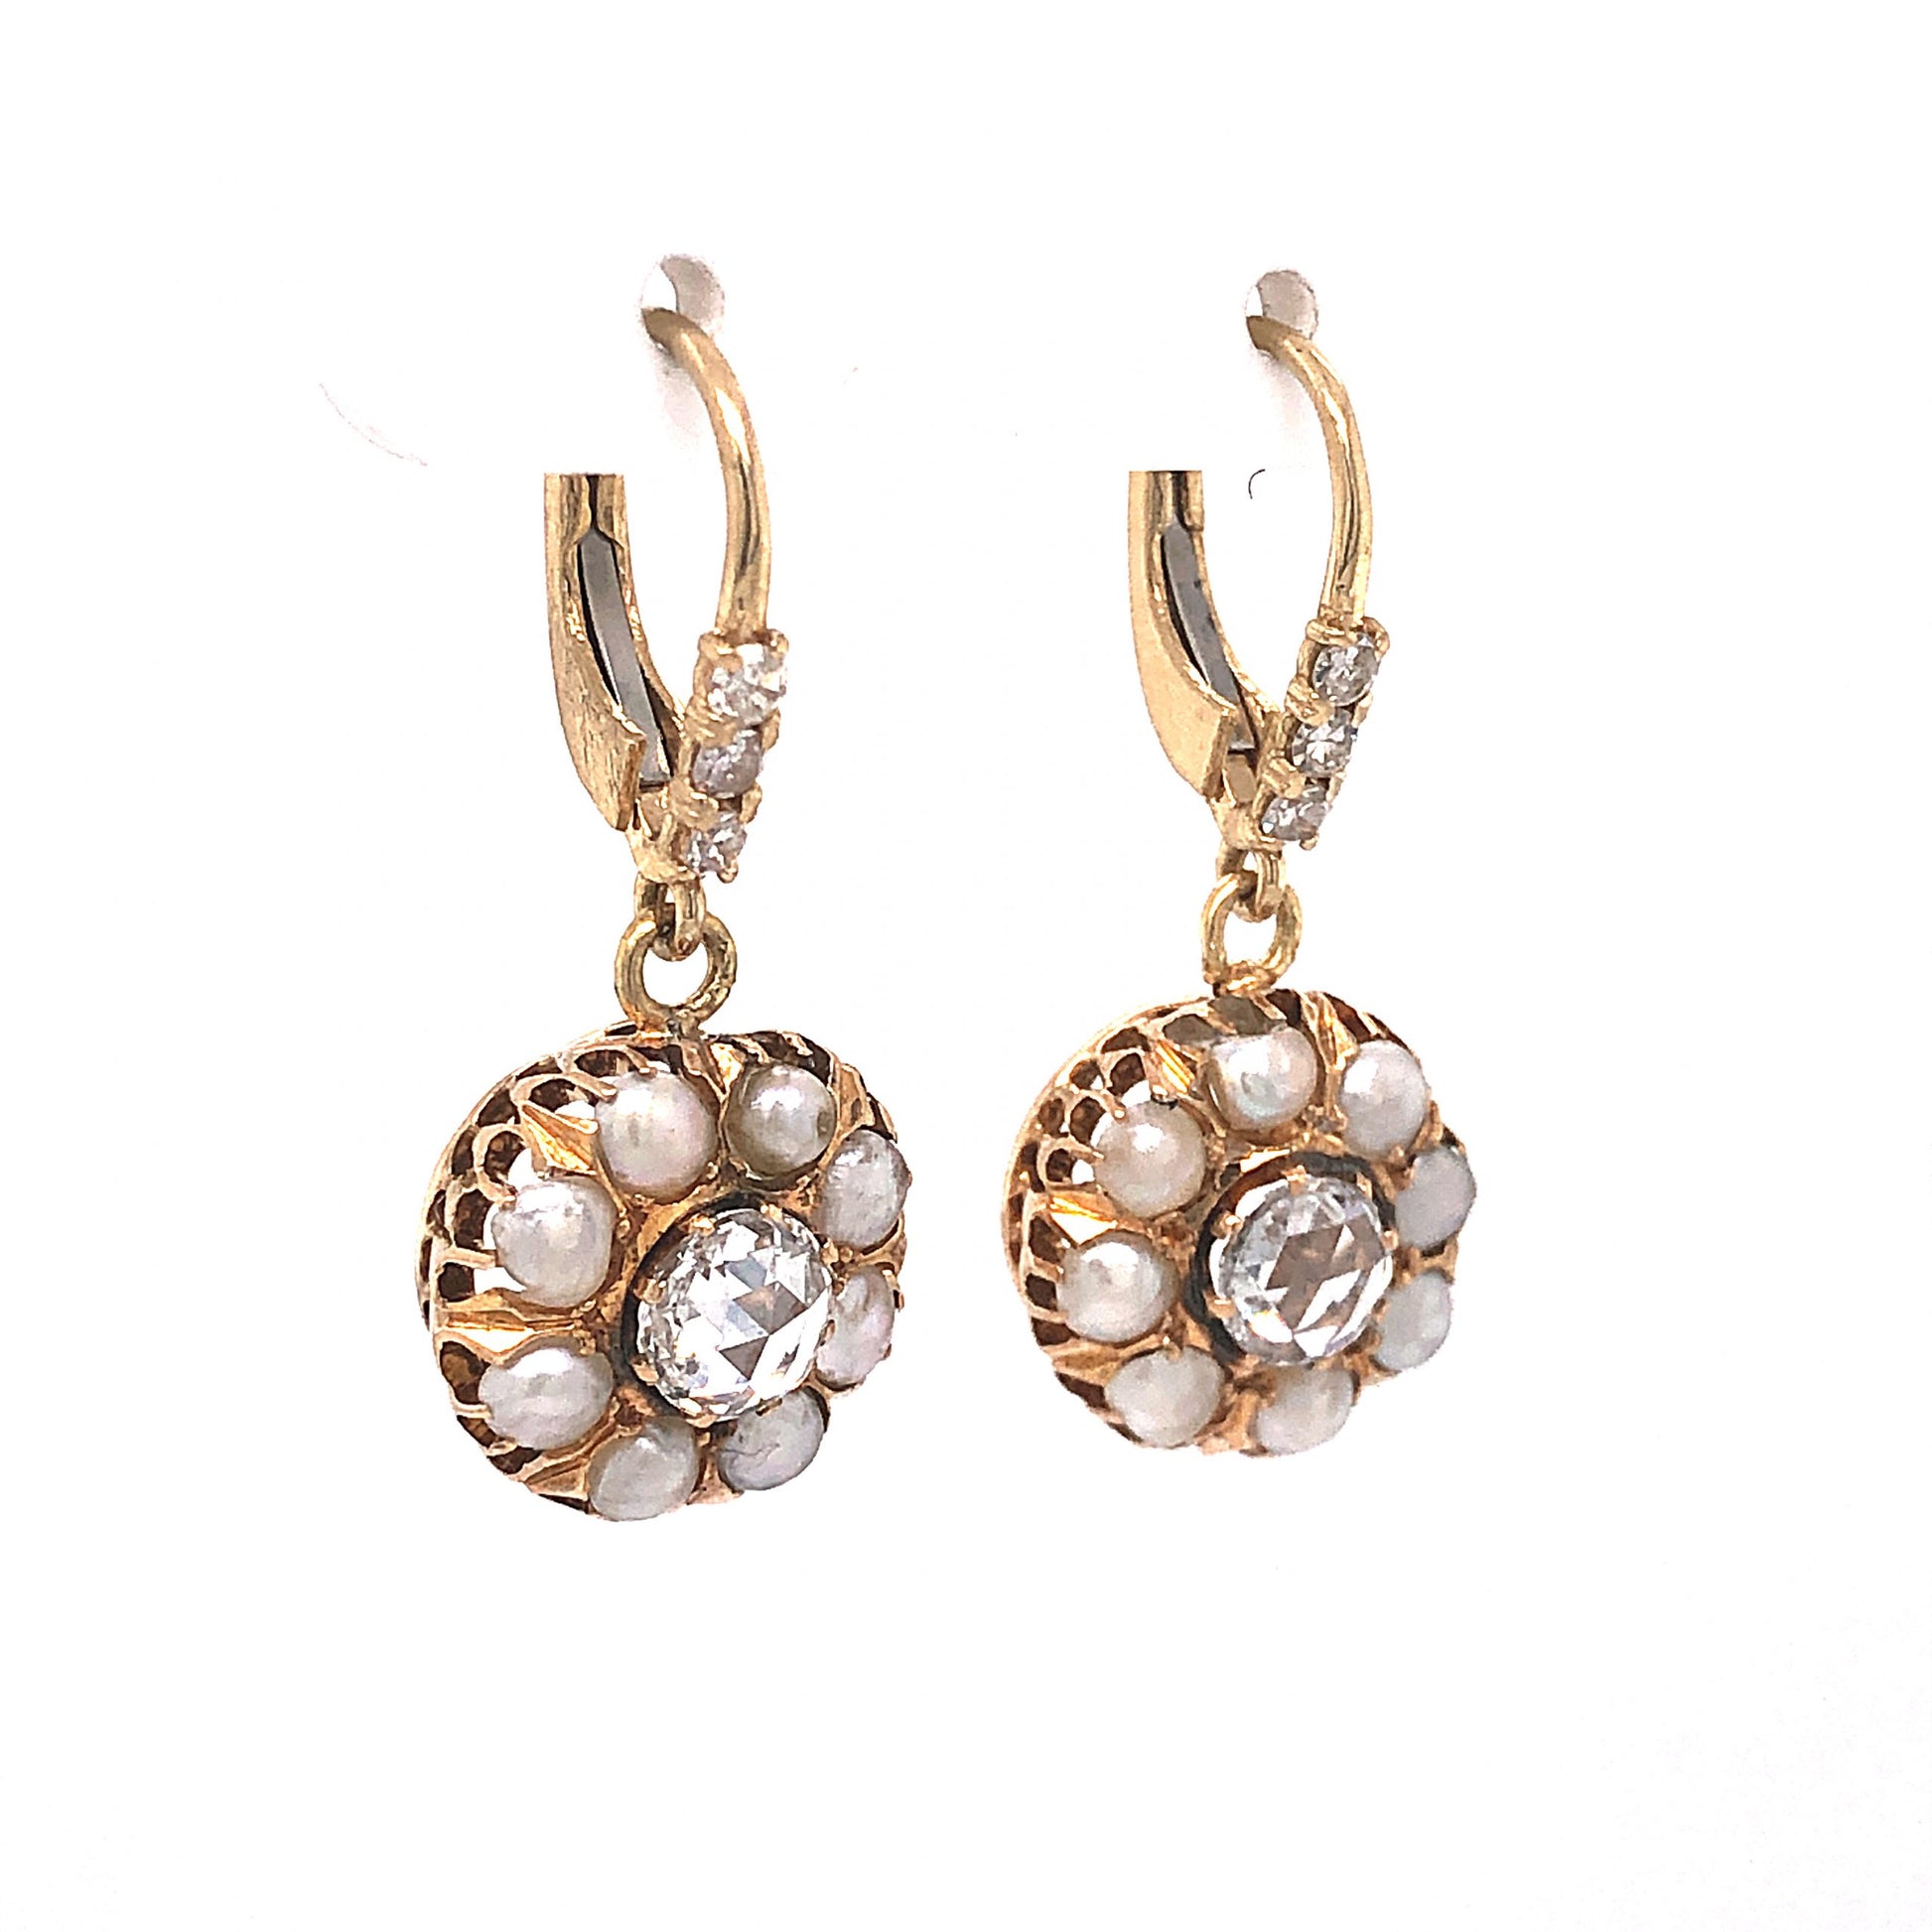 Victorian Pearl Halo Diamond Drop Earrings in 14k Yellow GoldComposition: 14 Karat Yellow Gold Total Diamond Weight: .88ct Total Gram Weight: 5.2 g Inscription: 14k
      